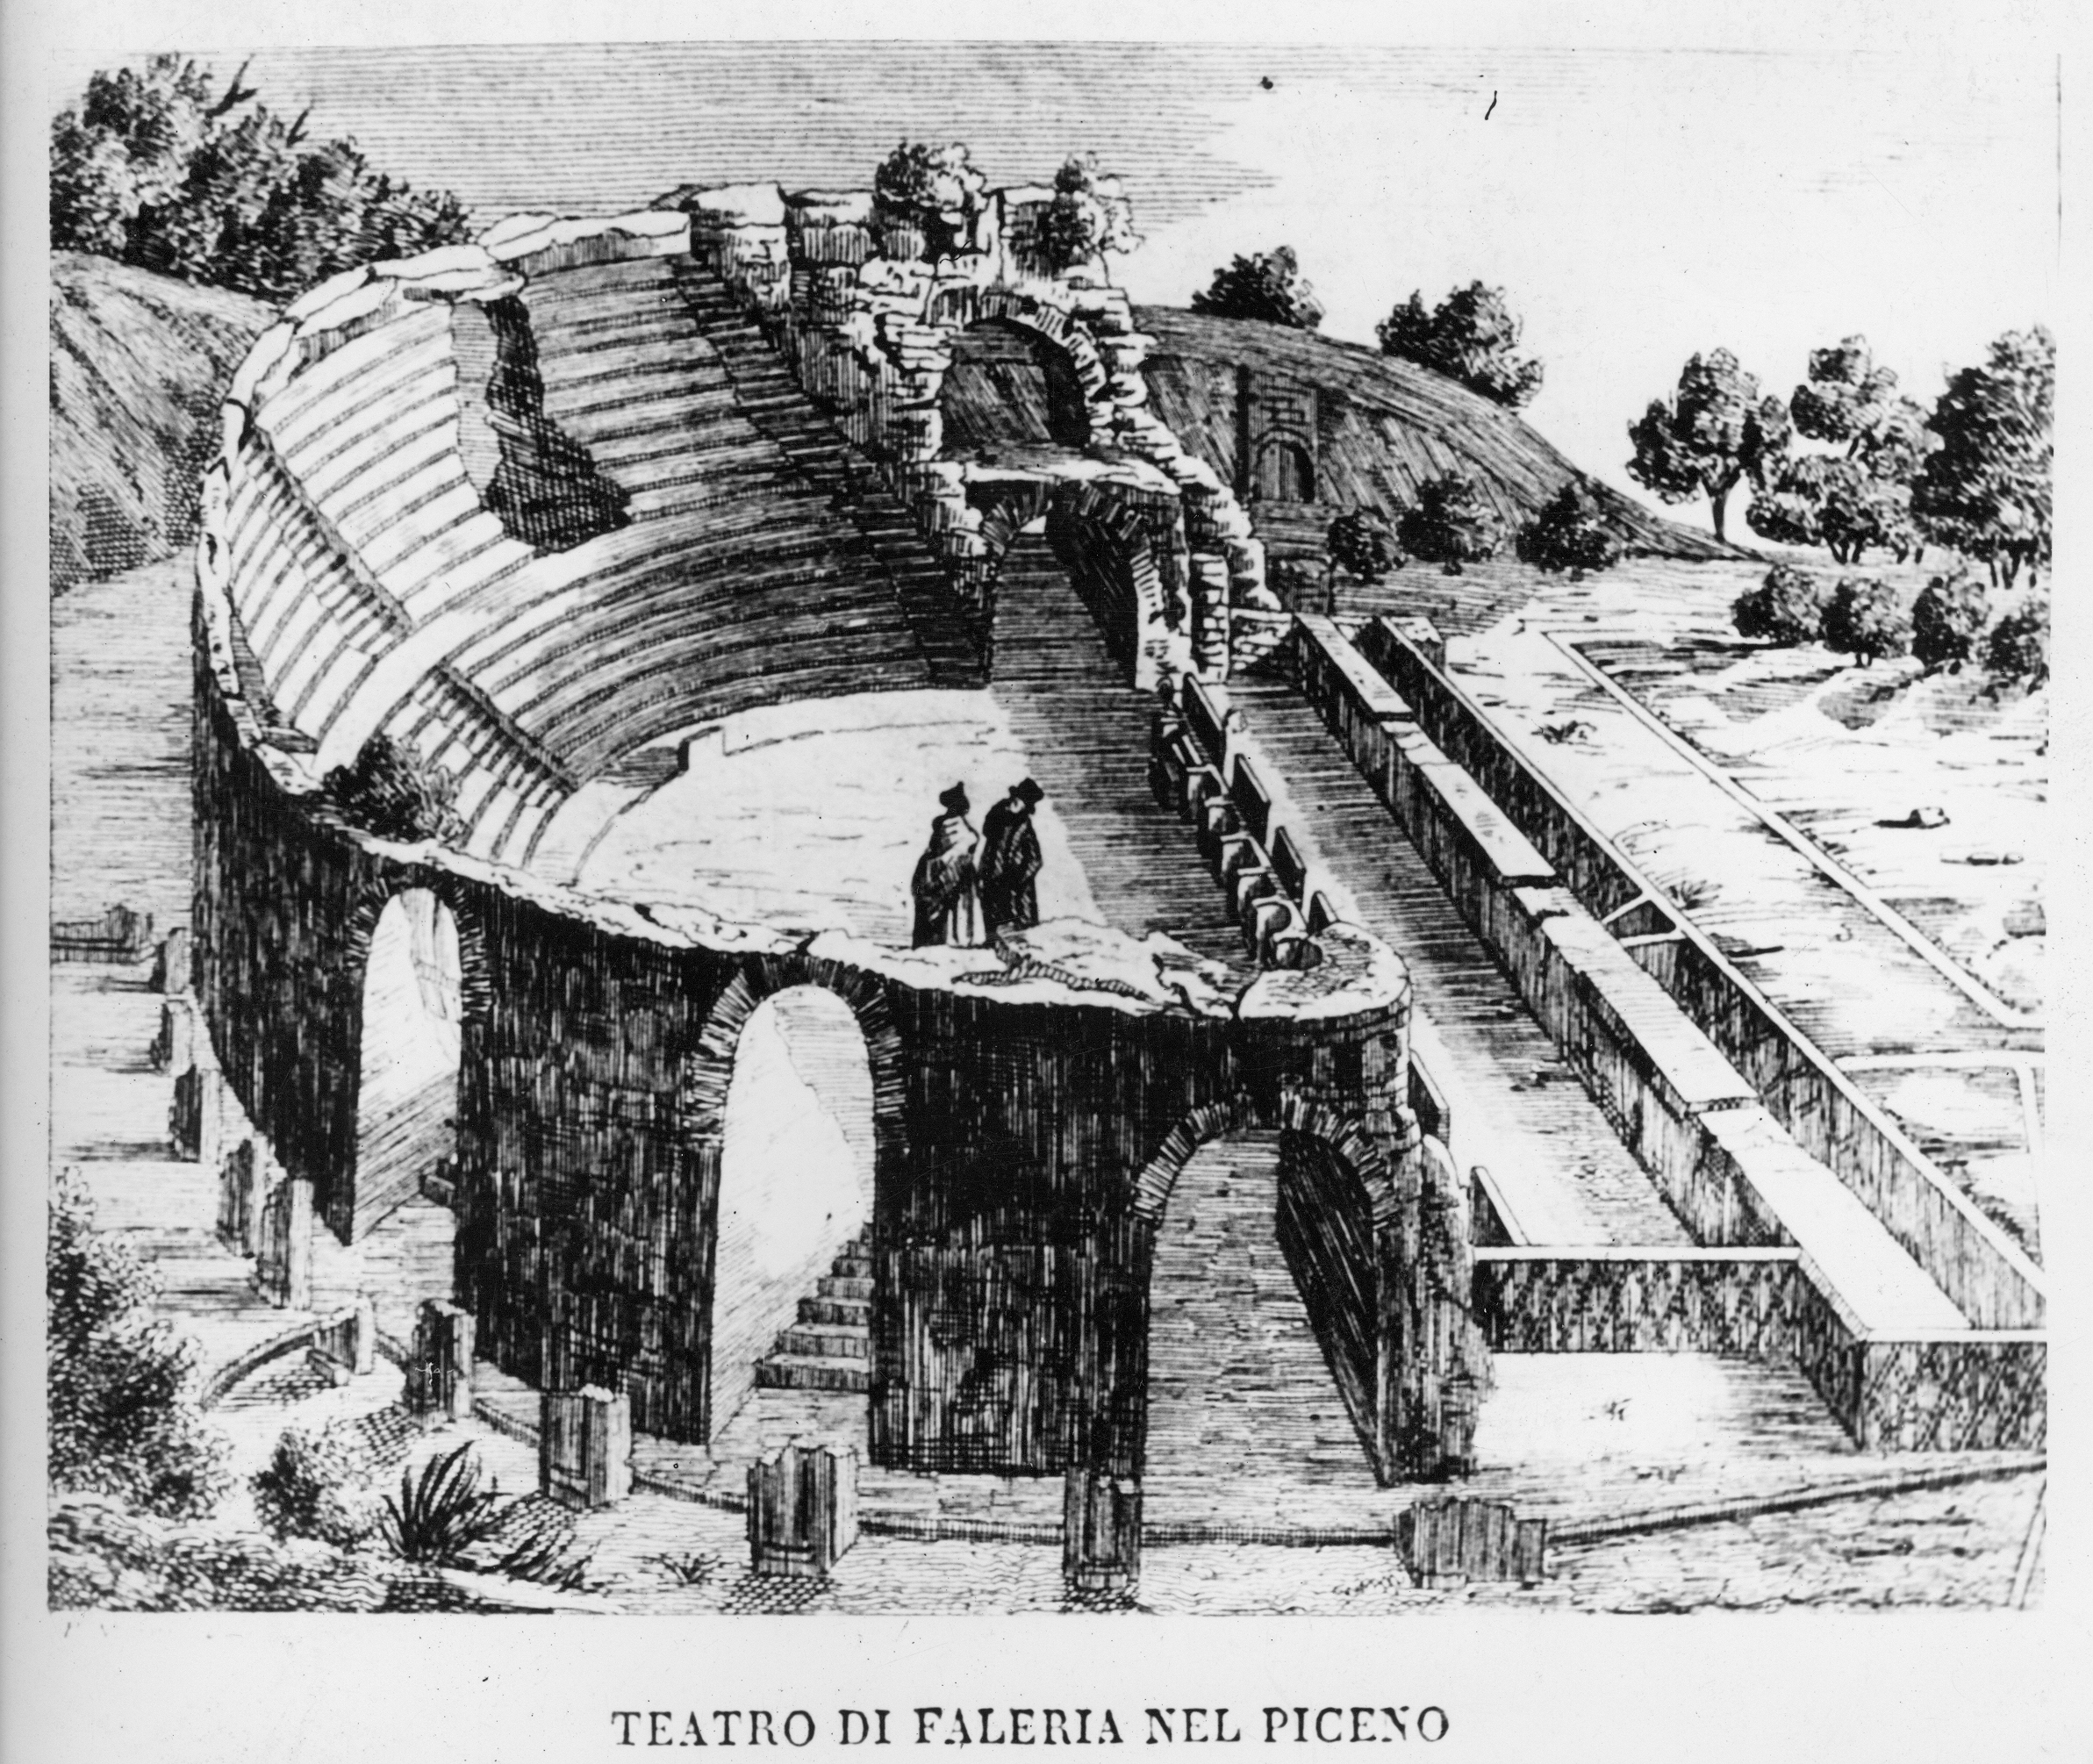  Figure 1. Illustration of the Falerone theatre by P. Mori after the excavations carried out by the De Minicis brothers (Campanari 1840, plate outside the text). 